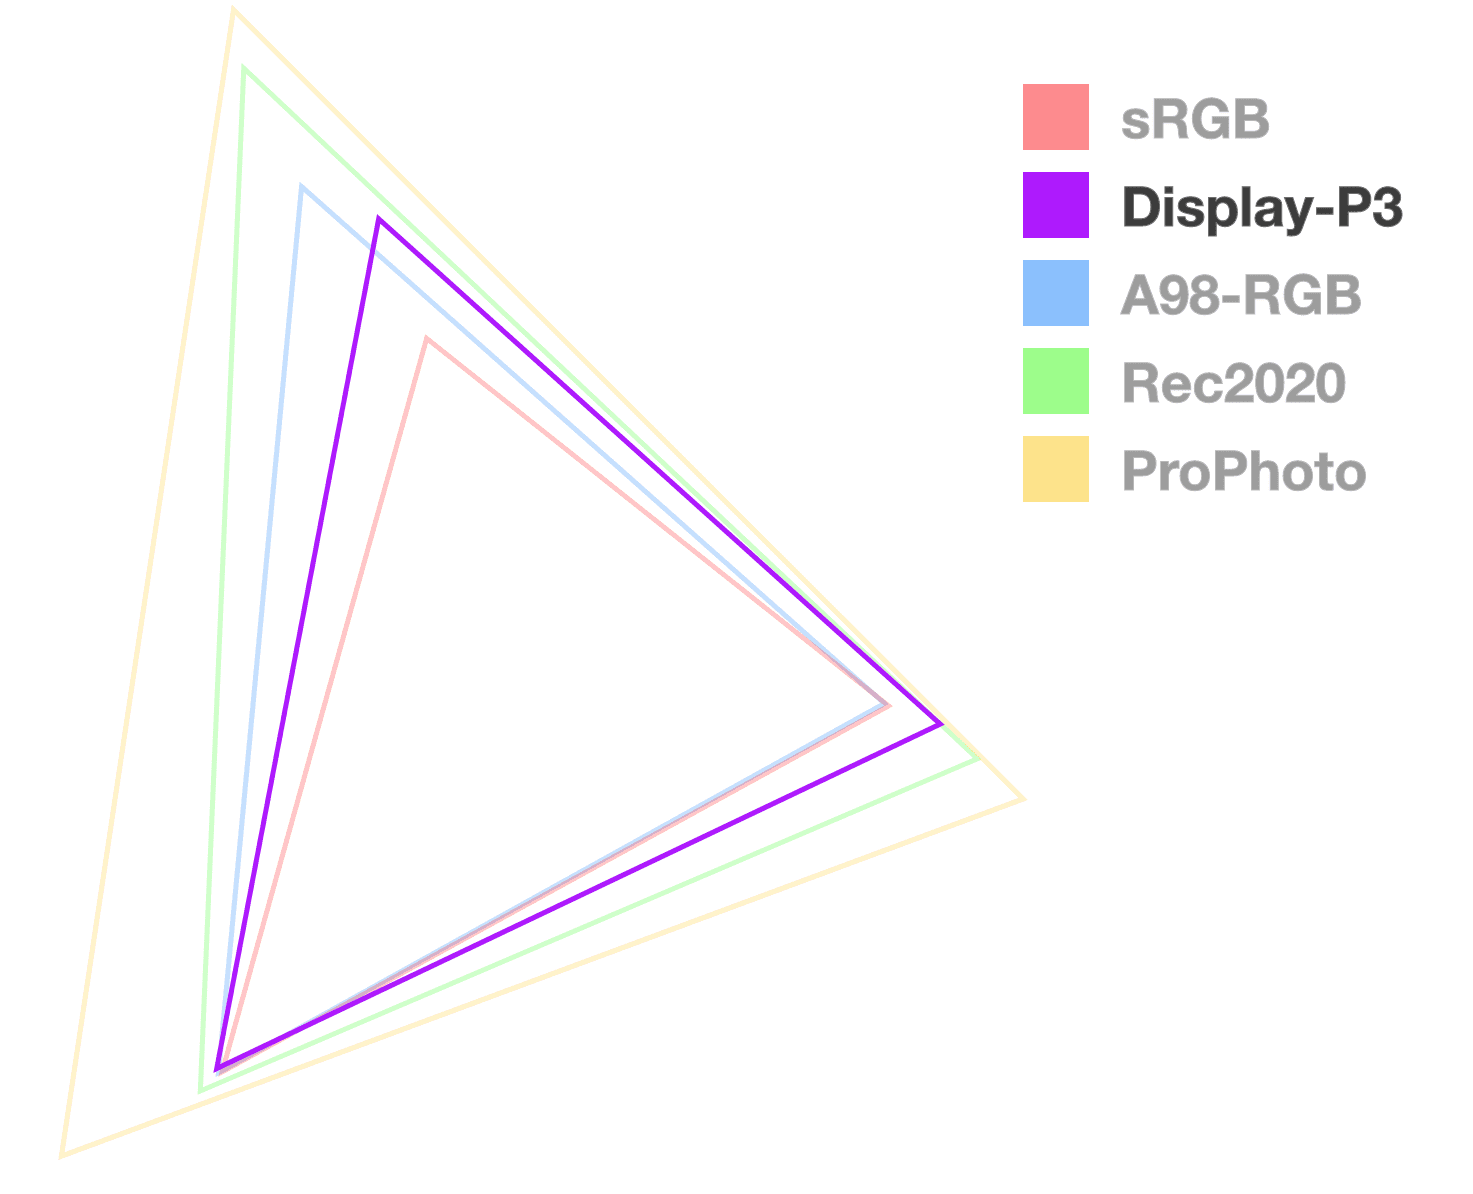 Display P3 triangle is the only one fully opaque, to help
  visualize the size of the gamut. It looks like 2nd from the smallest.